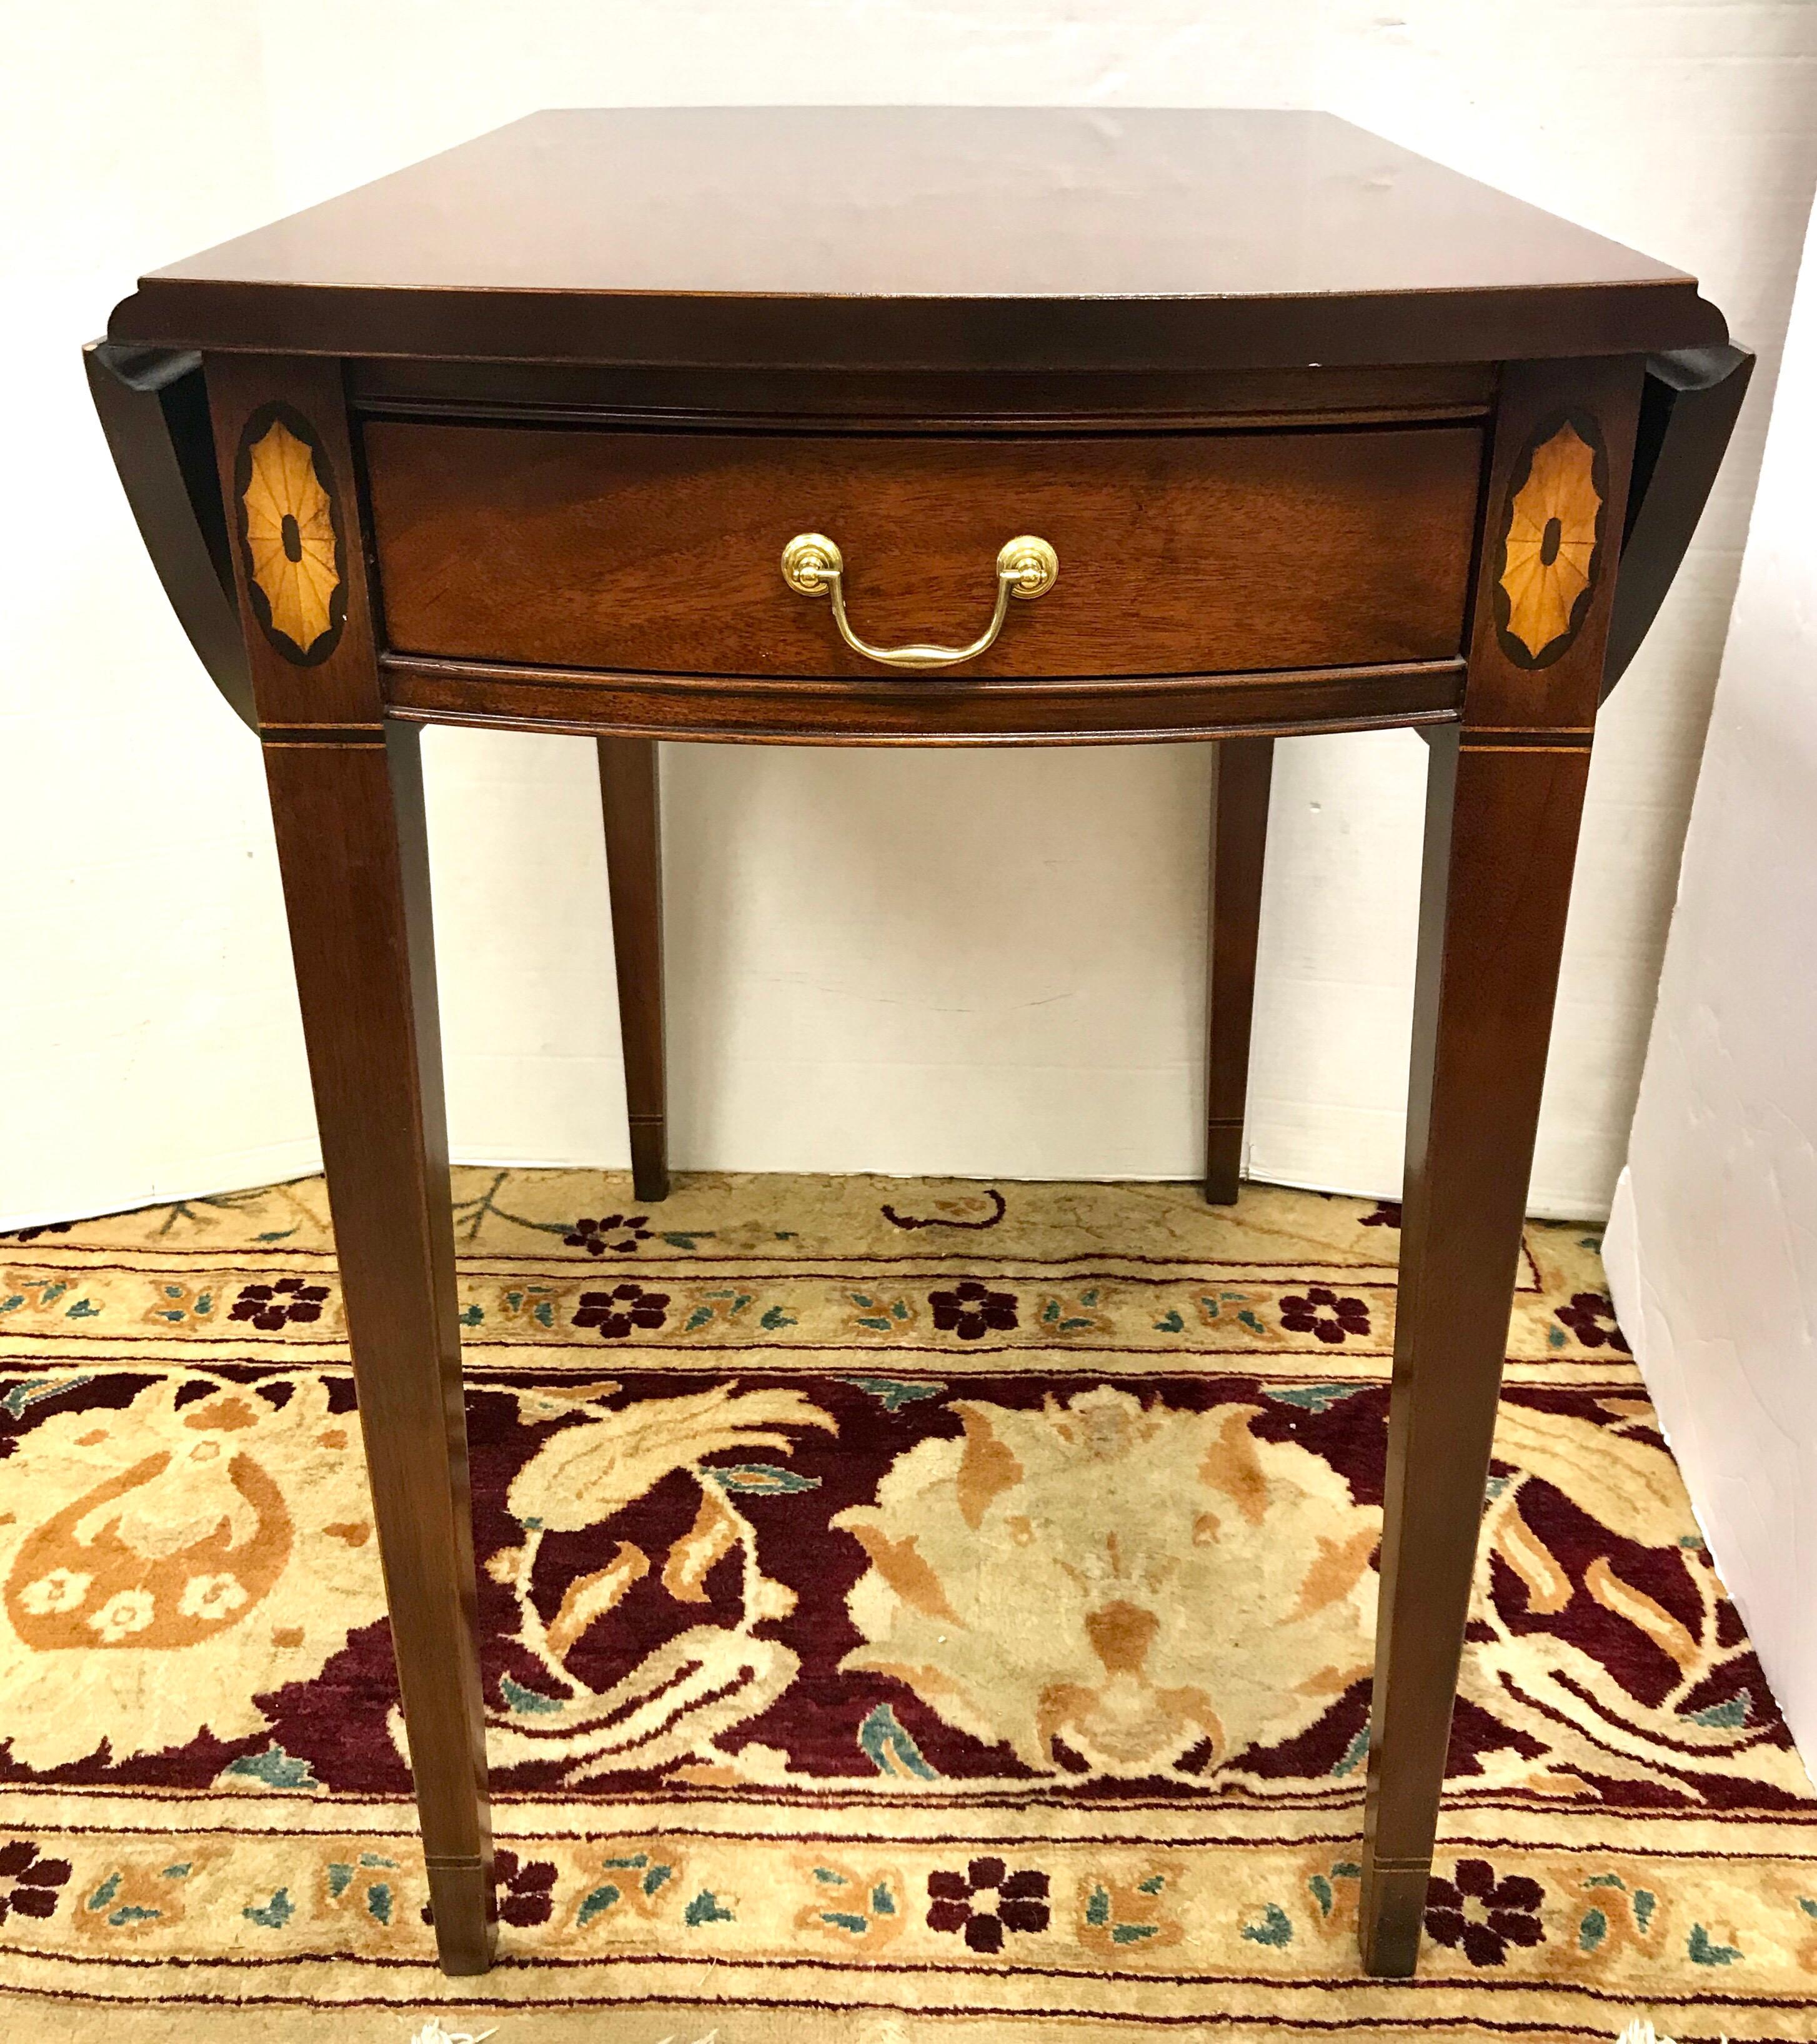 Pair of Pembroke one drawer drop-leaf tables work beautifully beside your bed, sofa or favourite chair. Leaves swing up into a broad oval, making extra space for glasses, books or projects. Solid mahogany with line and oval inlay and square tapered